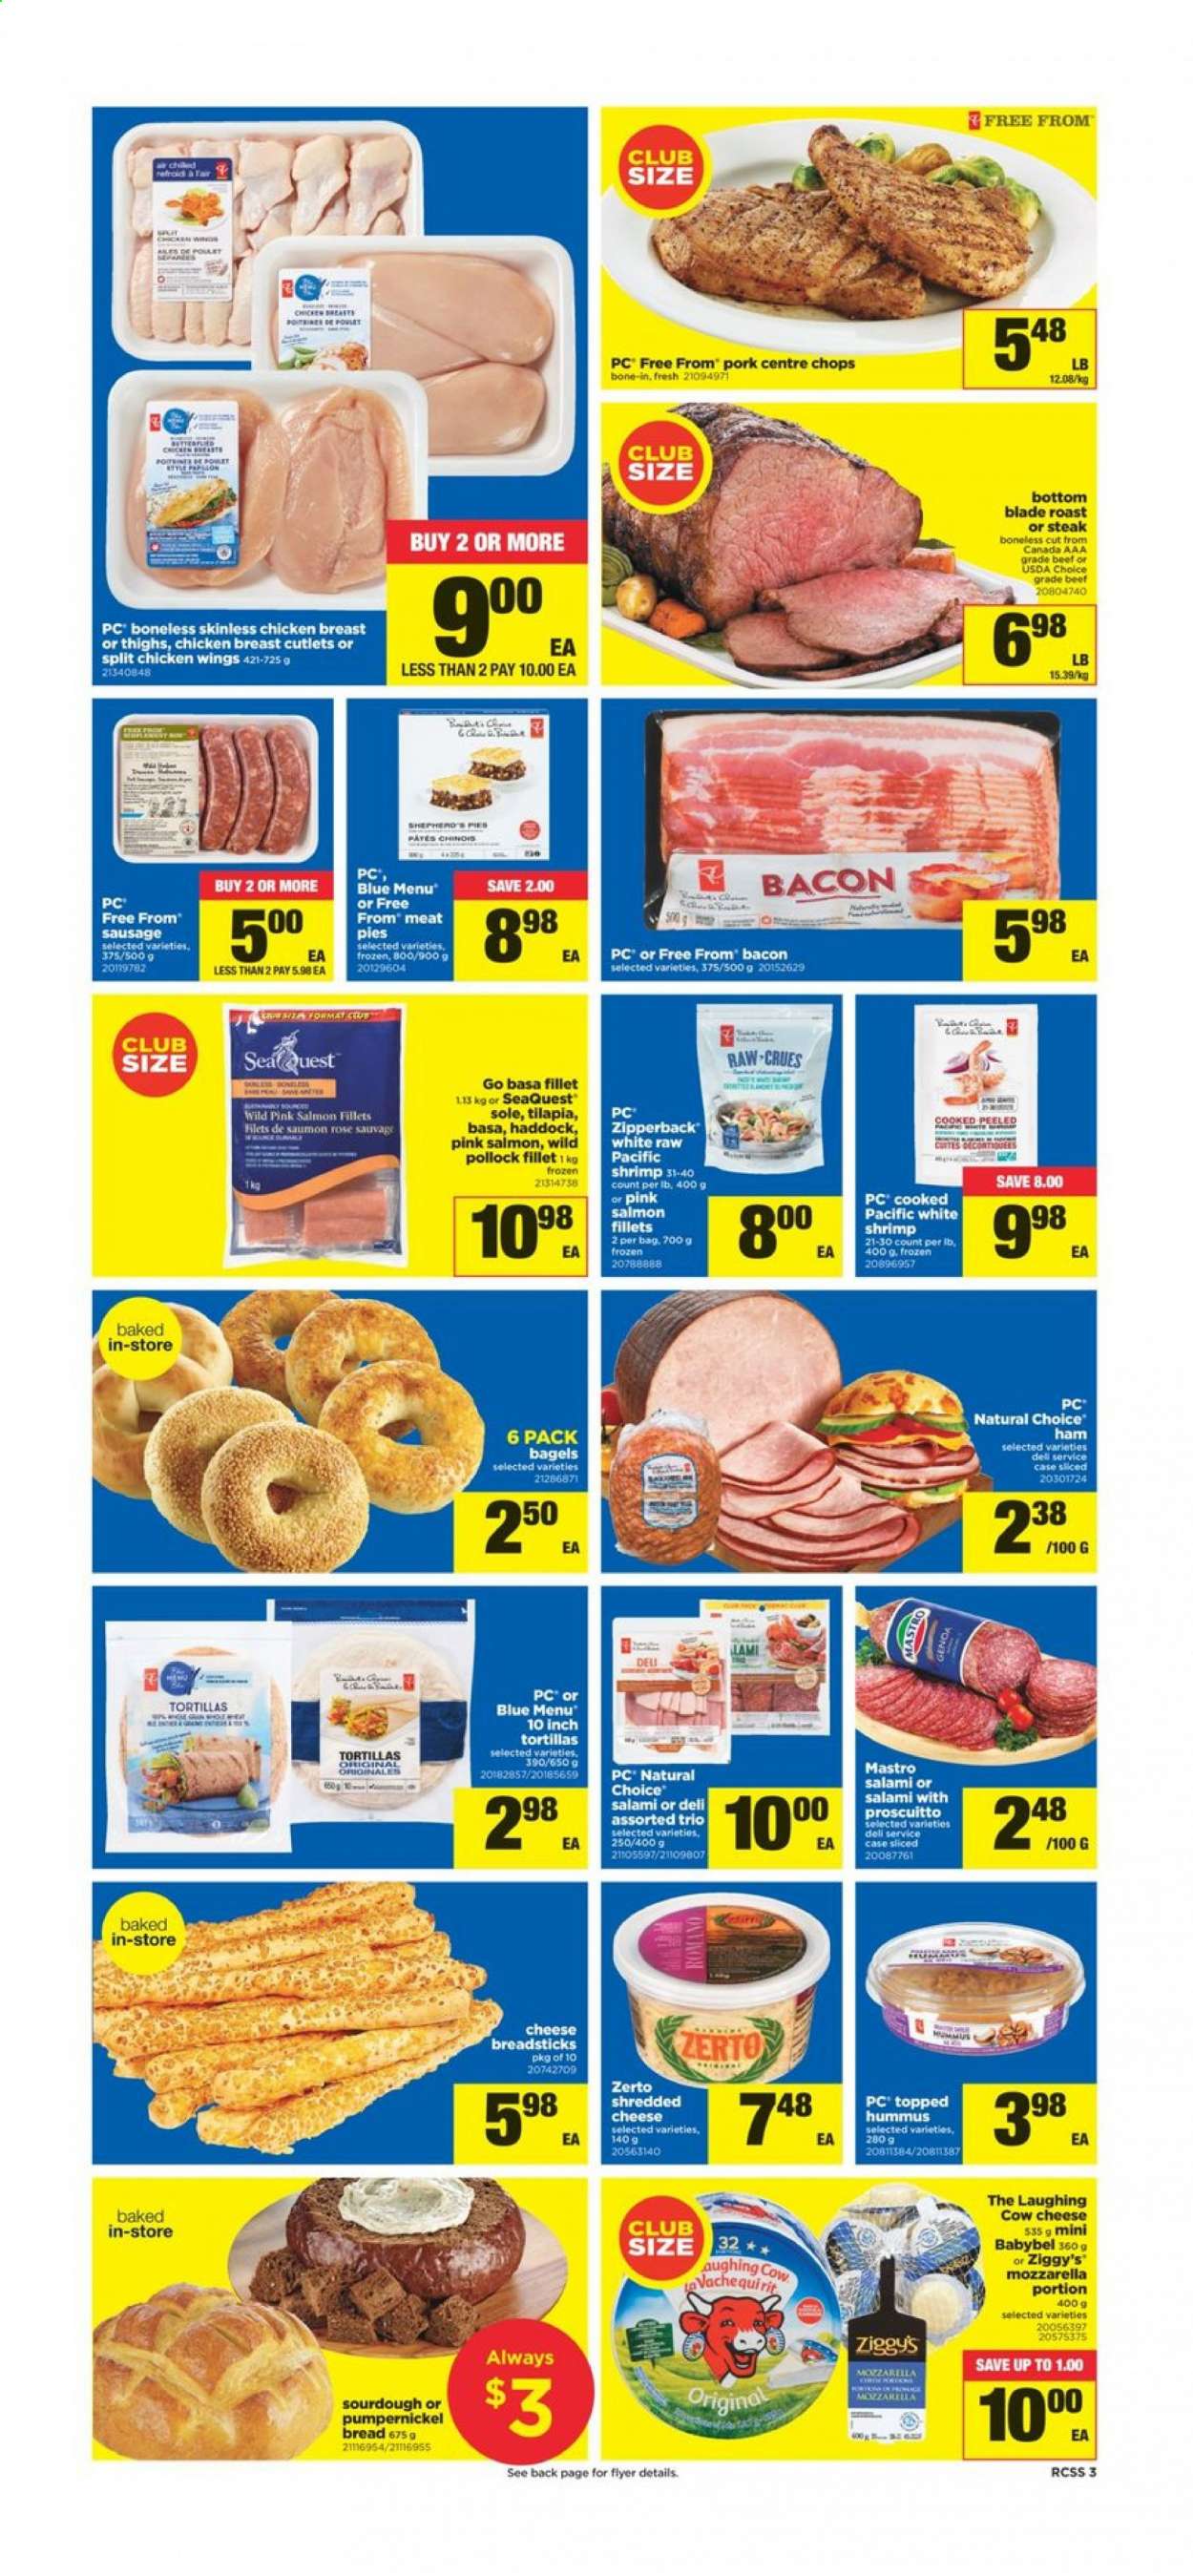 thumbnail - Real Canadian Superstore Flyer - February 18, 2021 - February 24, 2021 - Sales products - bagels, bread, tortillas, salmon, salmon fillet, tilapia, haddock, pollock, shrimps, bacon, salami, ham, sausage, hummus, shredded cheese, The Laughing Cow, Babybel, chicken wings, bread sticks, wine, rosé wine, chicken breasts, chicken, rose, mozzarella, steak. Page 3.